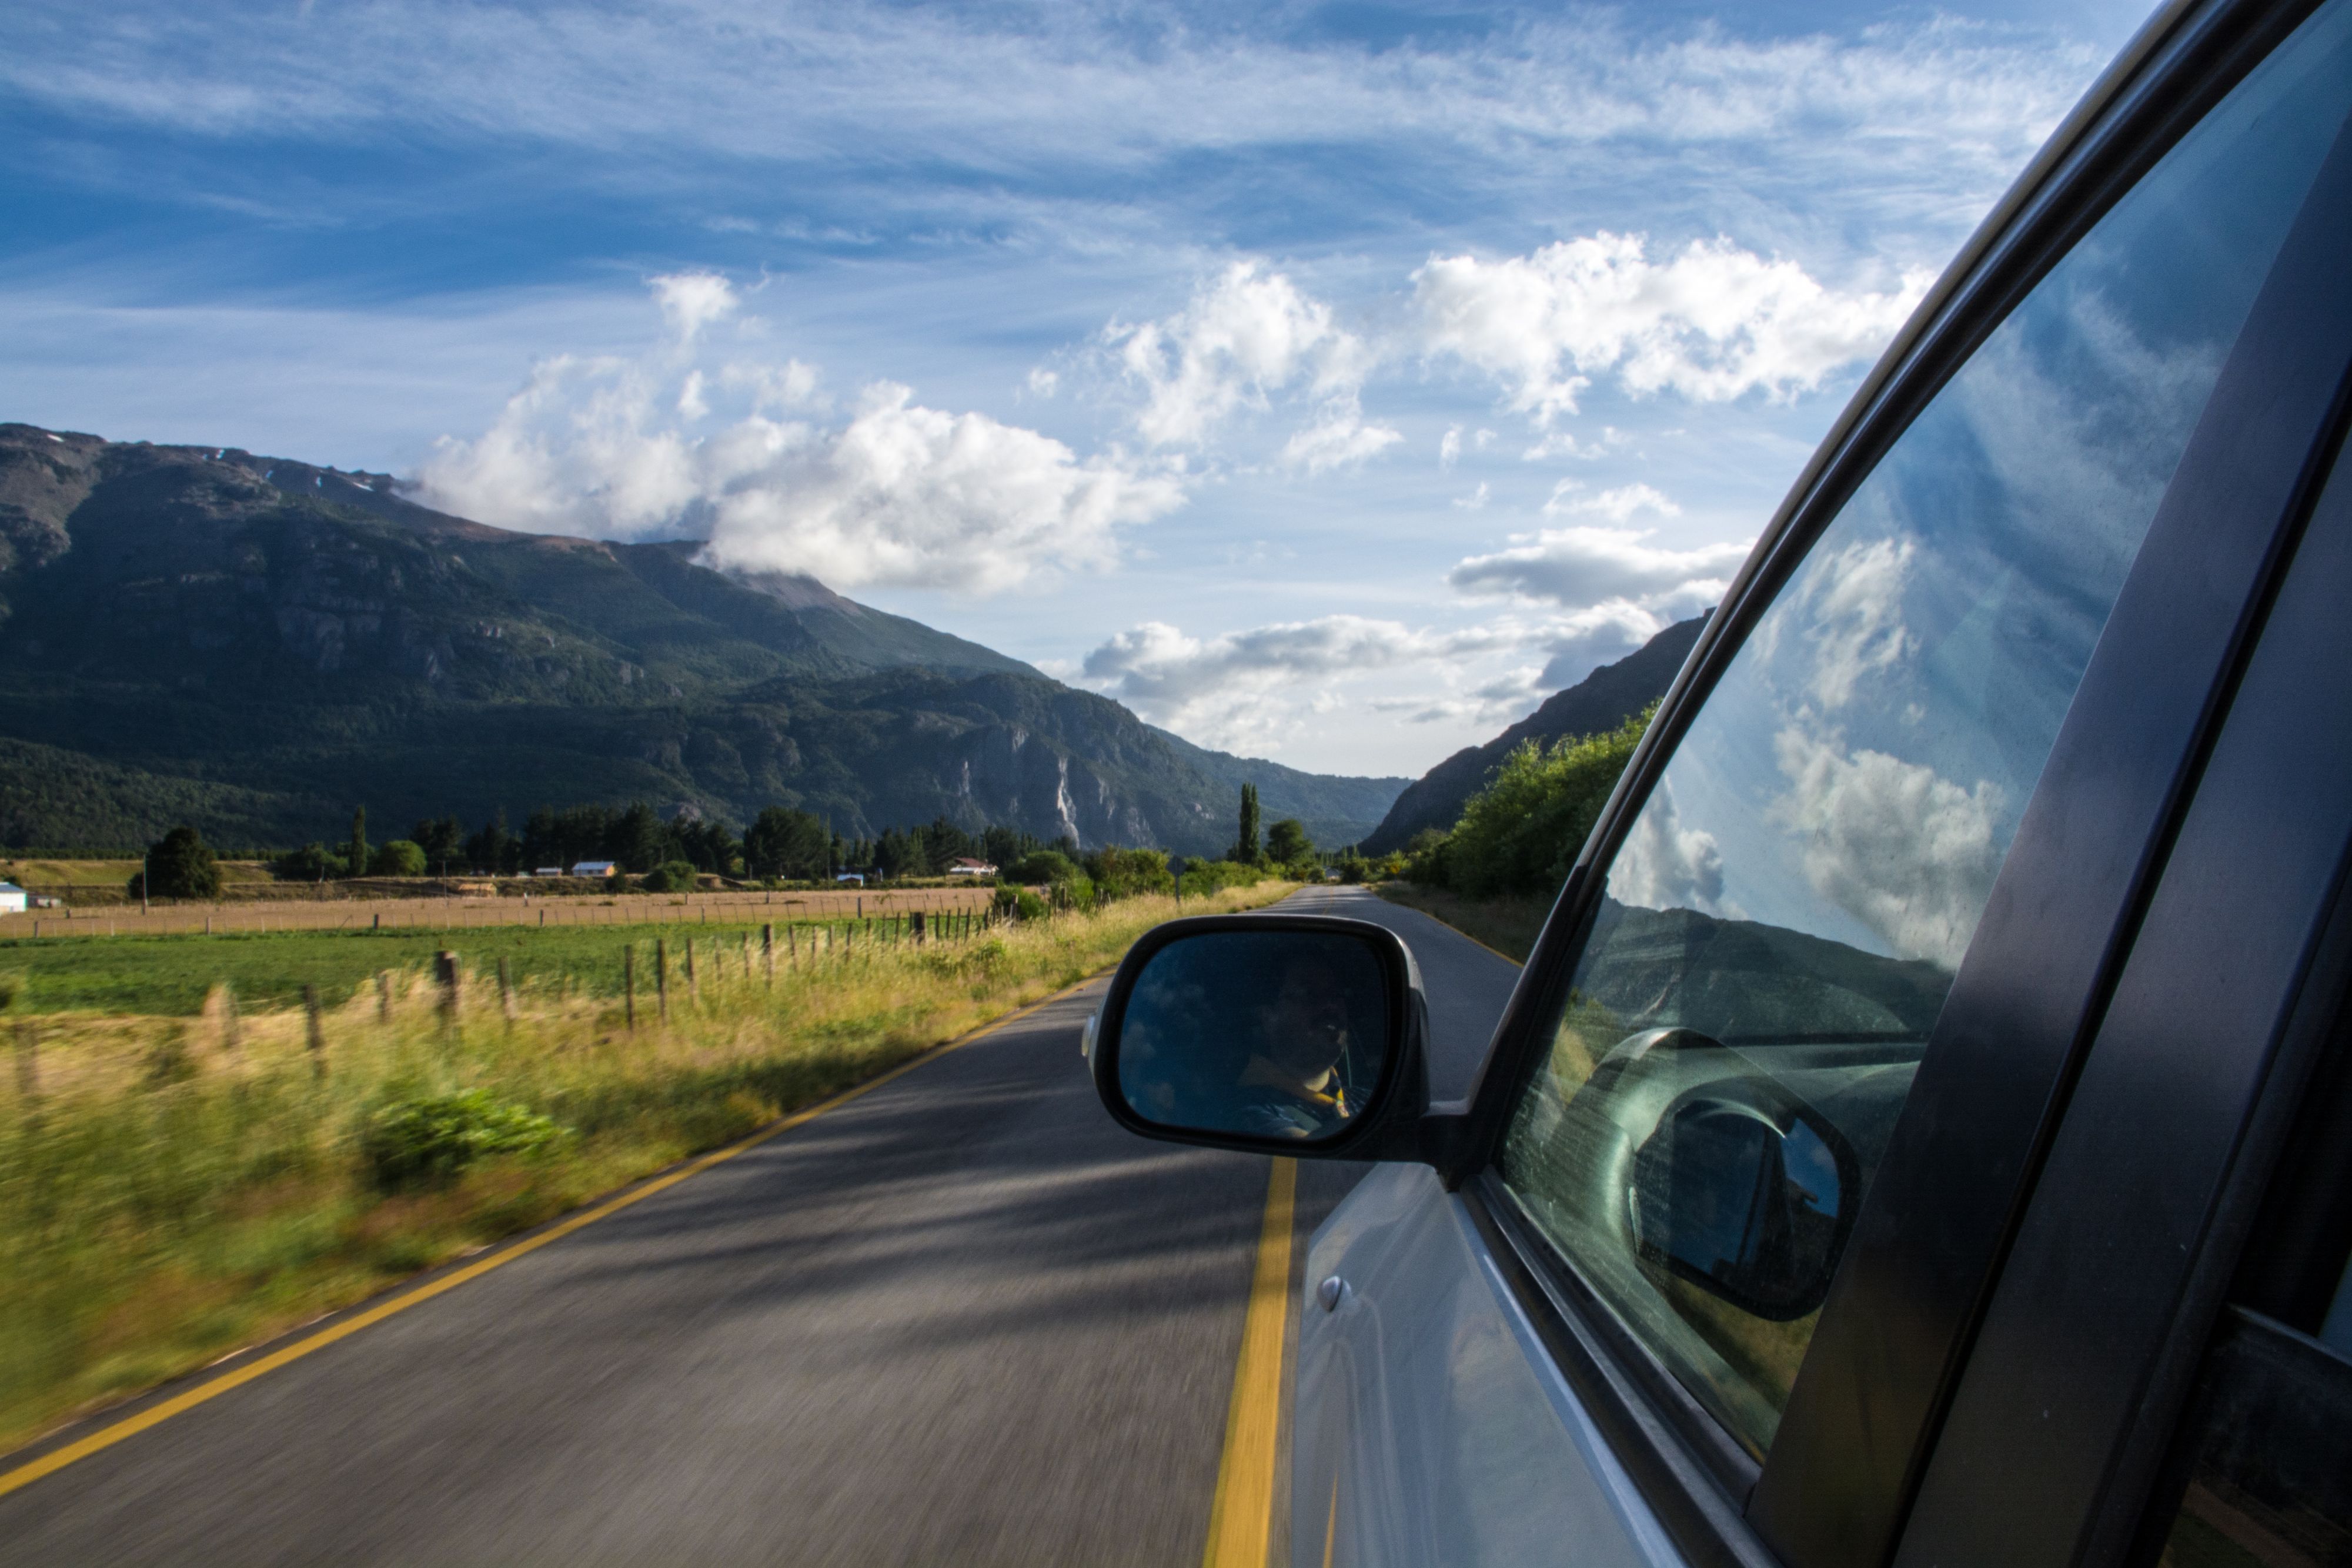 What do I choose for travel - personal car or rented car?